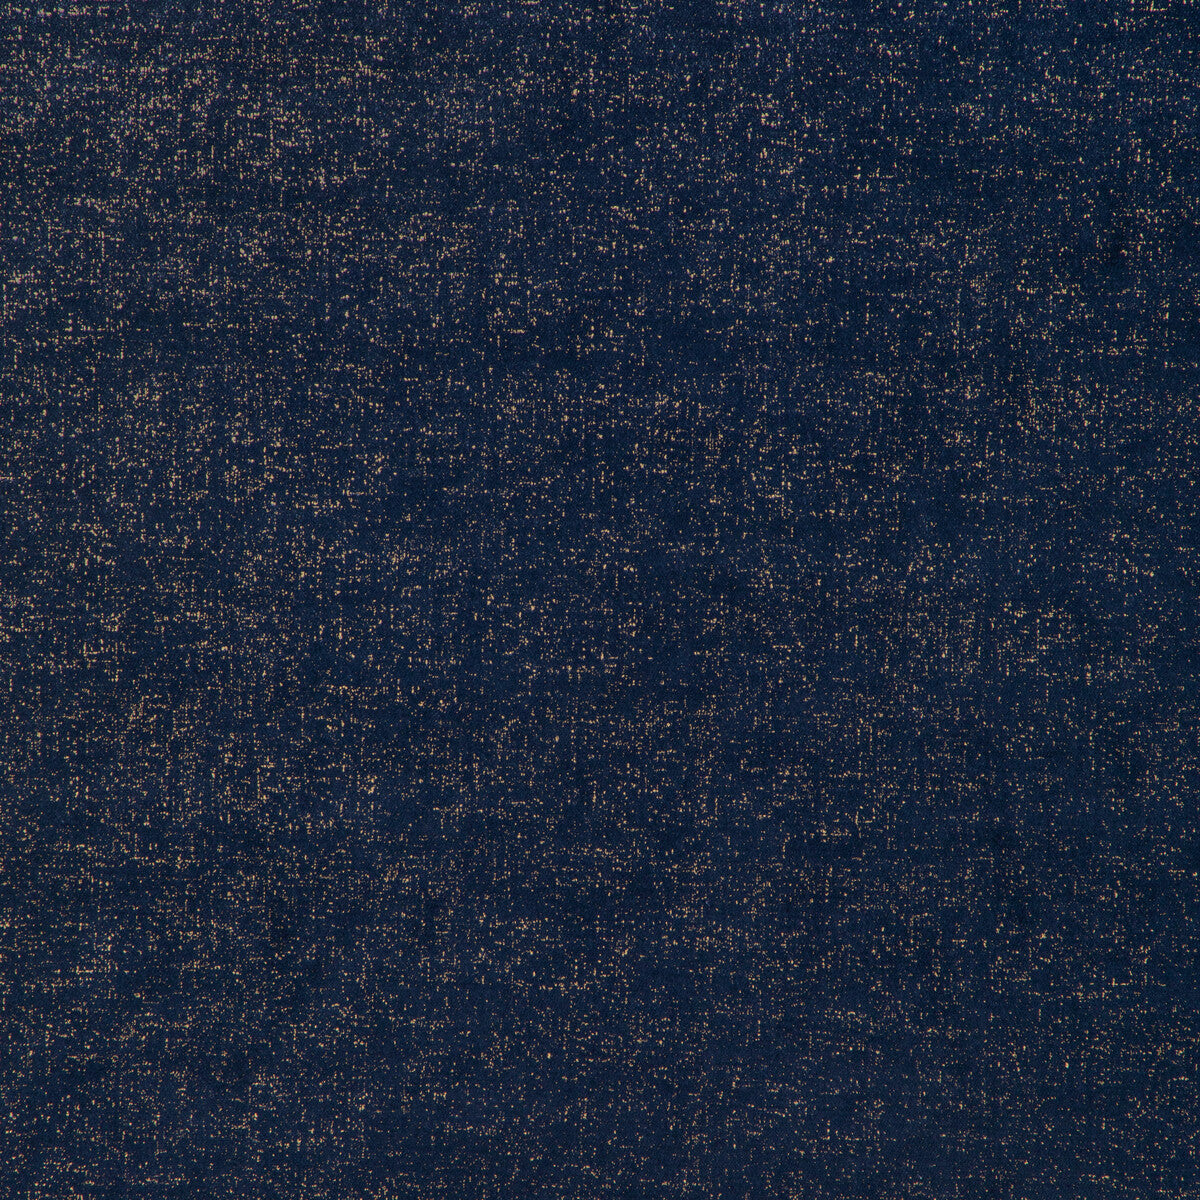 Night Fever fabric in starry night color - pattern 37281.54.0 - by Kravet Contract in the Happy Hour collection